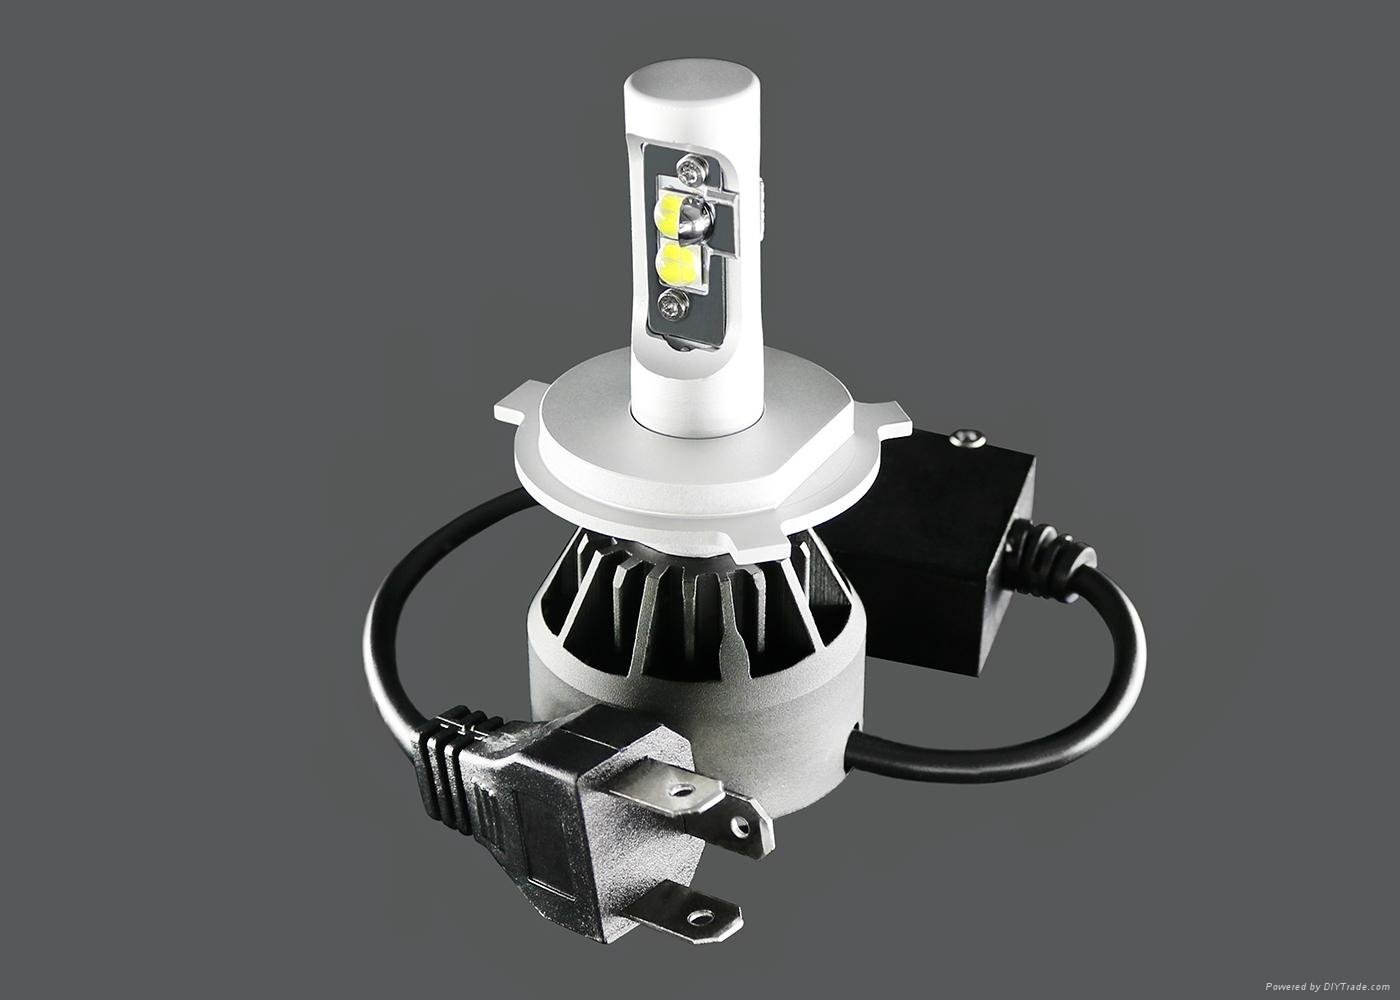 Brightest Auto H4 LED Cree Headlight Conversion Kits For Cars HB2 9003 Headlamps 2